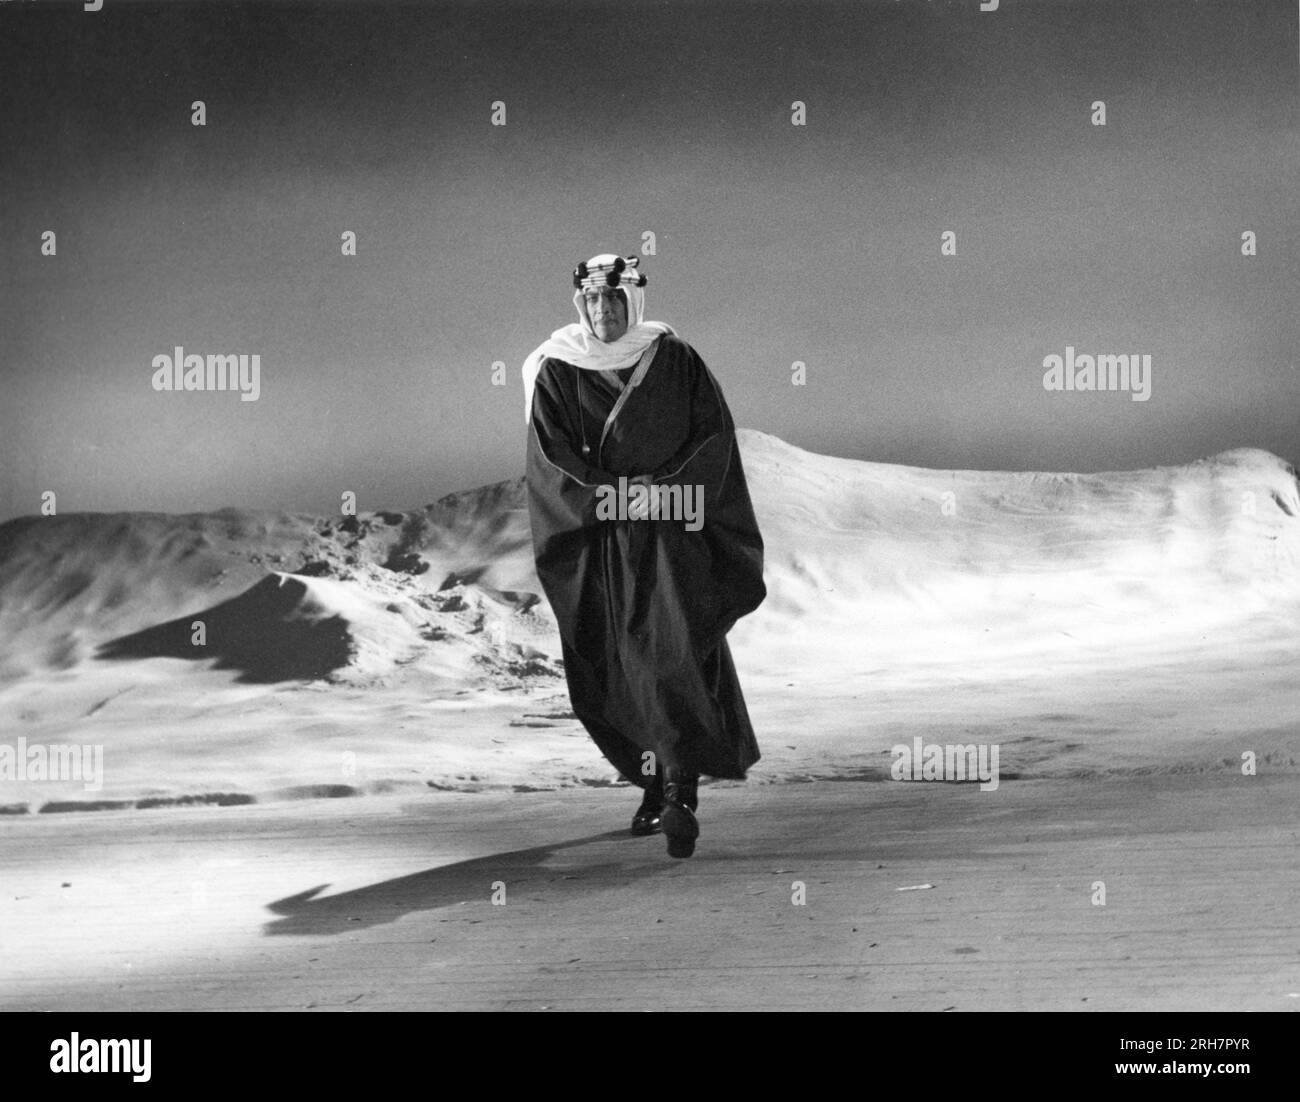 PETER O'TOOLE Screen Test as T.E. Lawrence for LAWRENCE OF ARABIA 1962 director DAVID LEAN screenplay Robert Bolt and Michael Wilson producer Sam Spiegel Horizon Pictures / Columbia Pictures Corporation Stock Photo